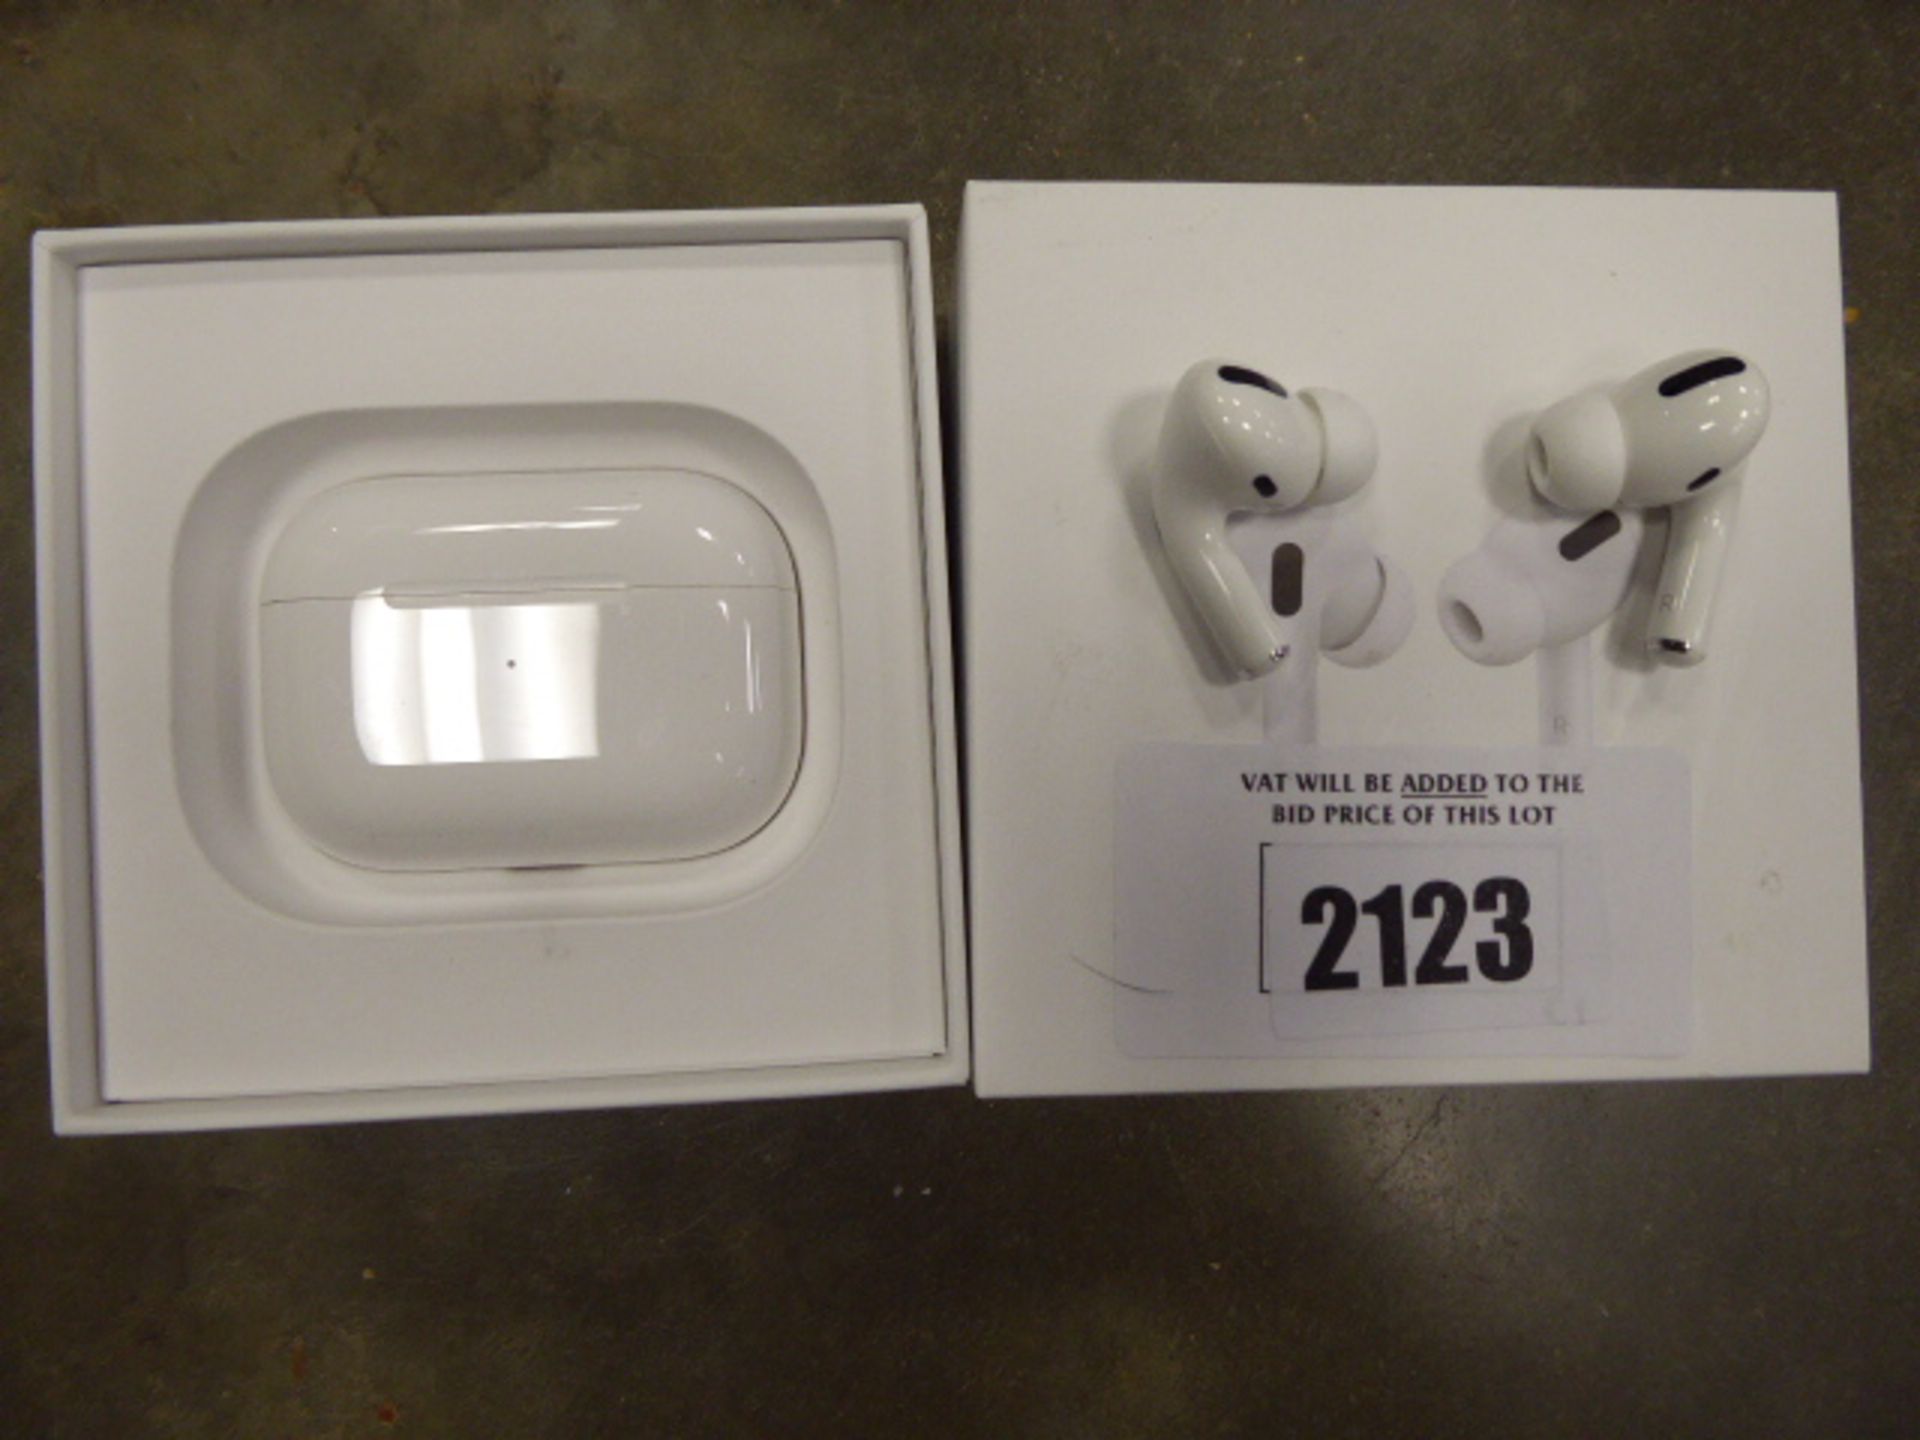 Pair of Apple AirPods with wireless charging case and box